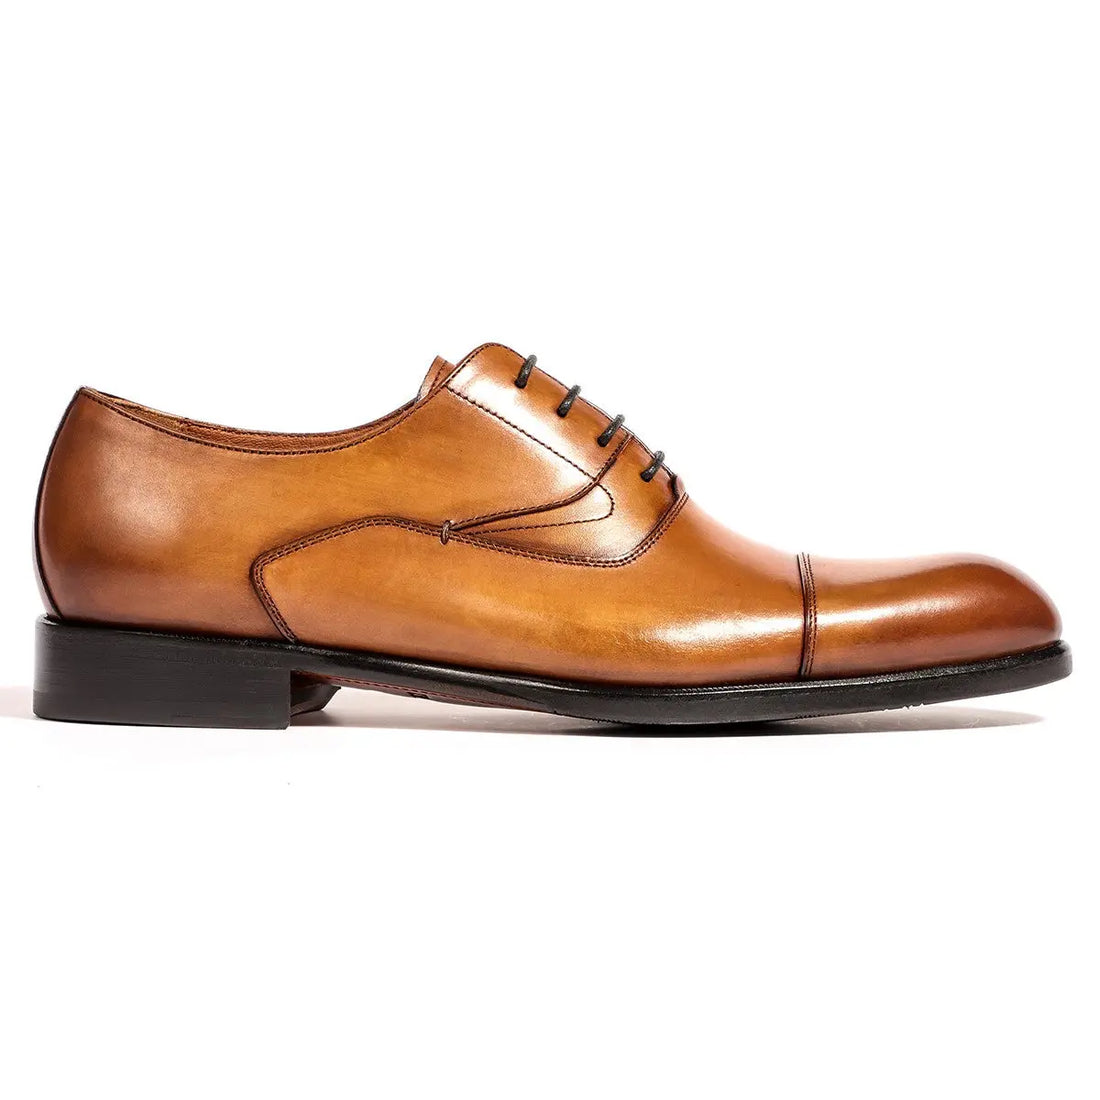 Men's genuine leather high-end business formal suit leather shoes Oxford shoes 97008 Leizilei